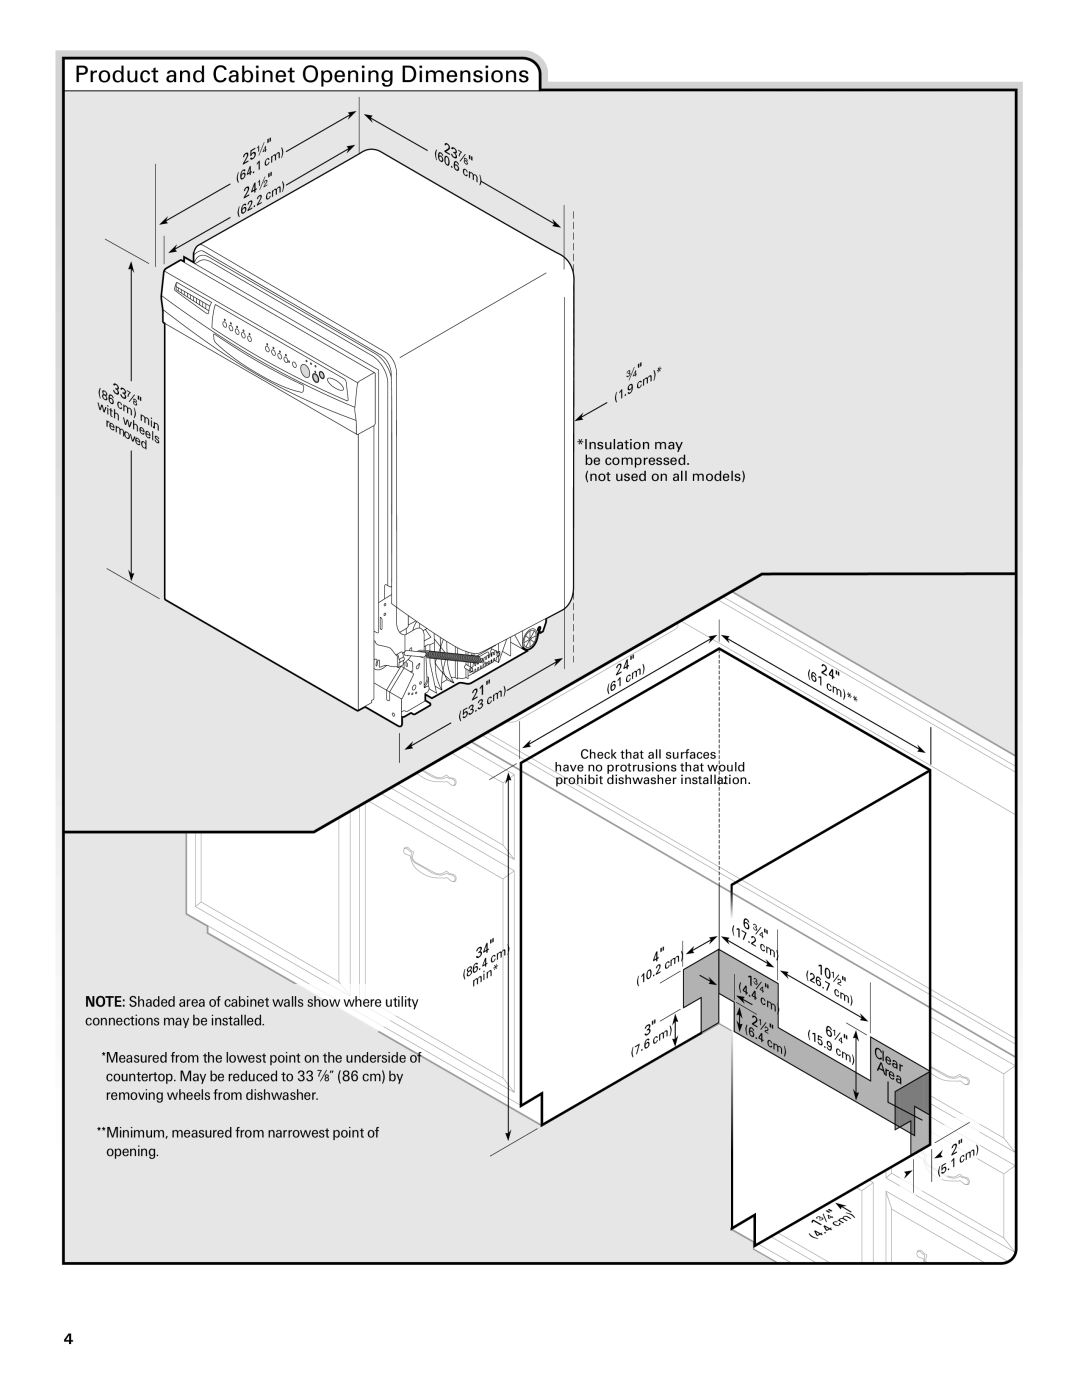 Amana W10261420A Product and Cabinet Opening Dimensions, with, Check that all surfaces have no protrusions that would 